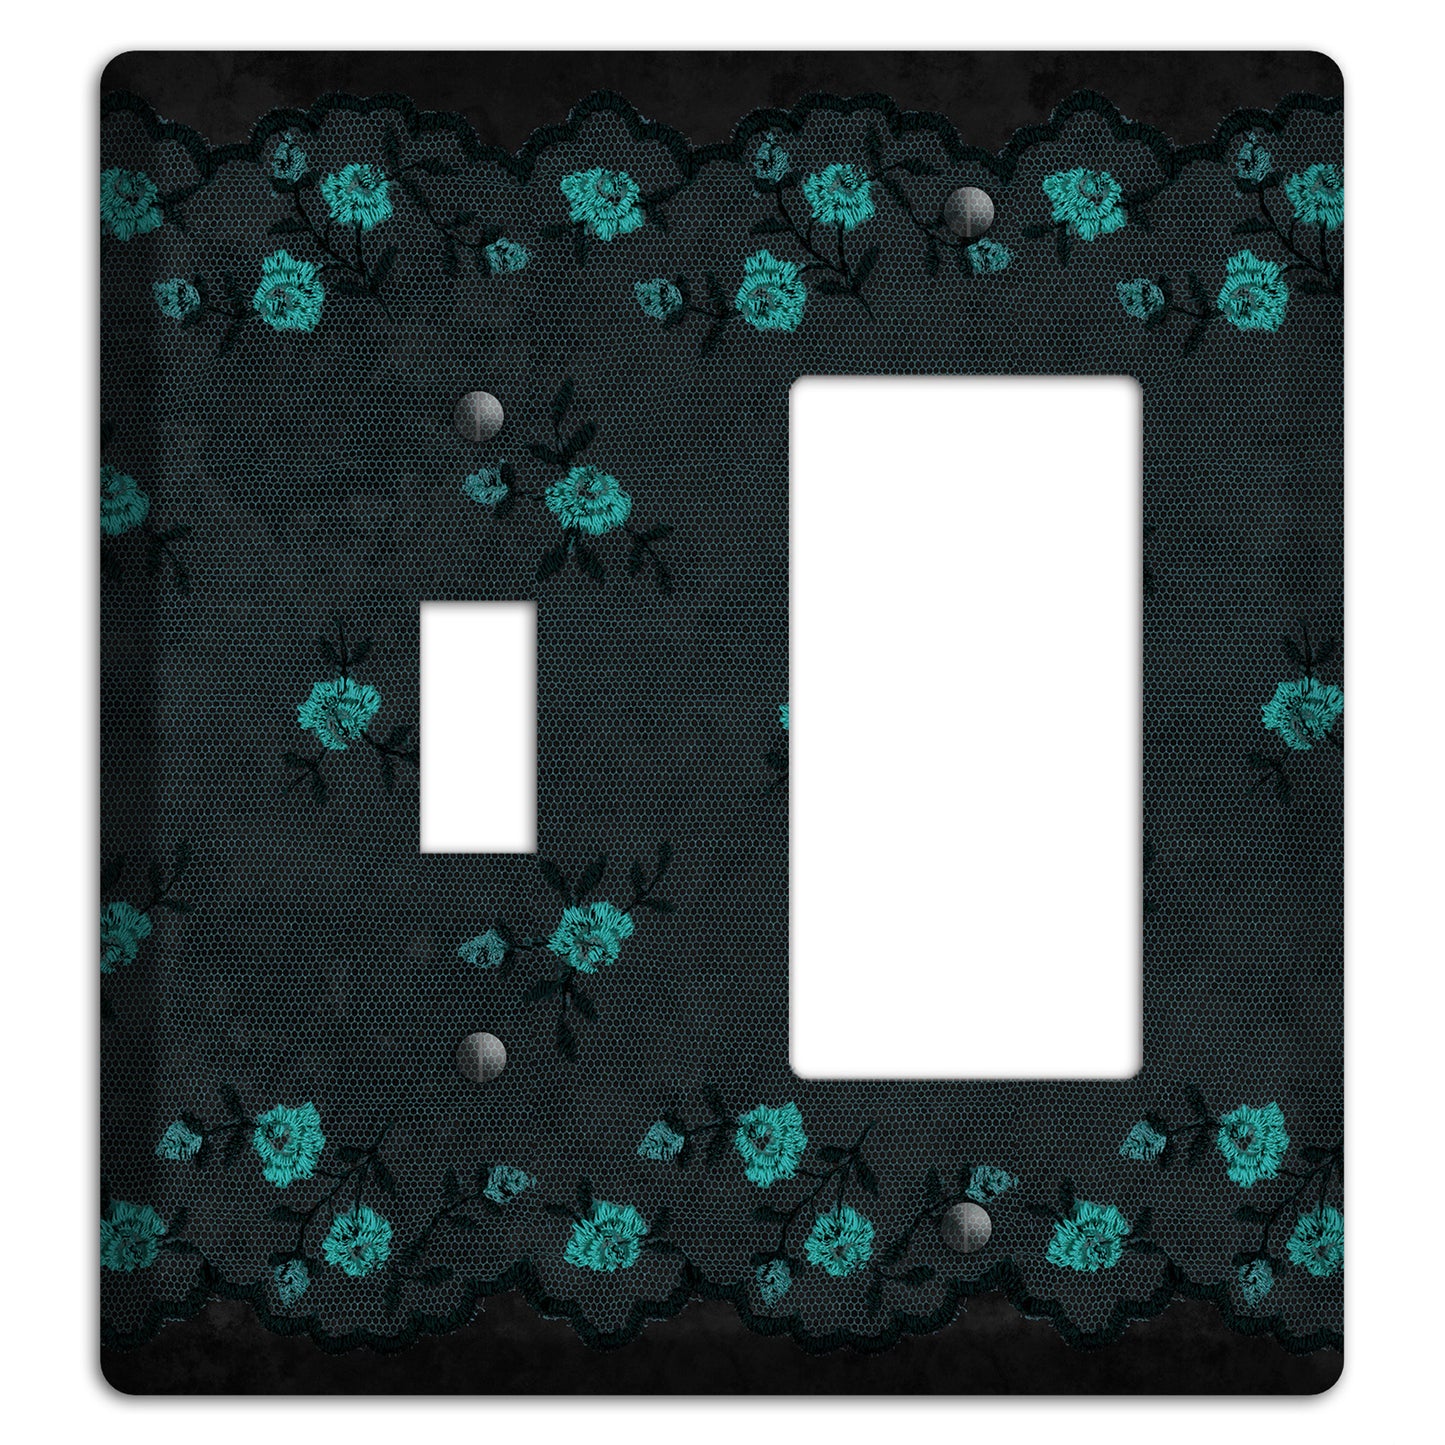 Embroidered Floral Black Toggle / Rocker Wallplate